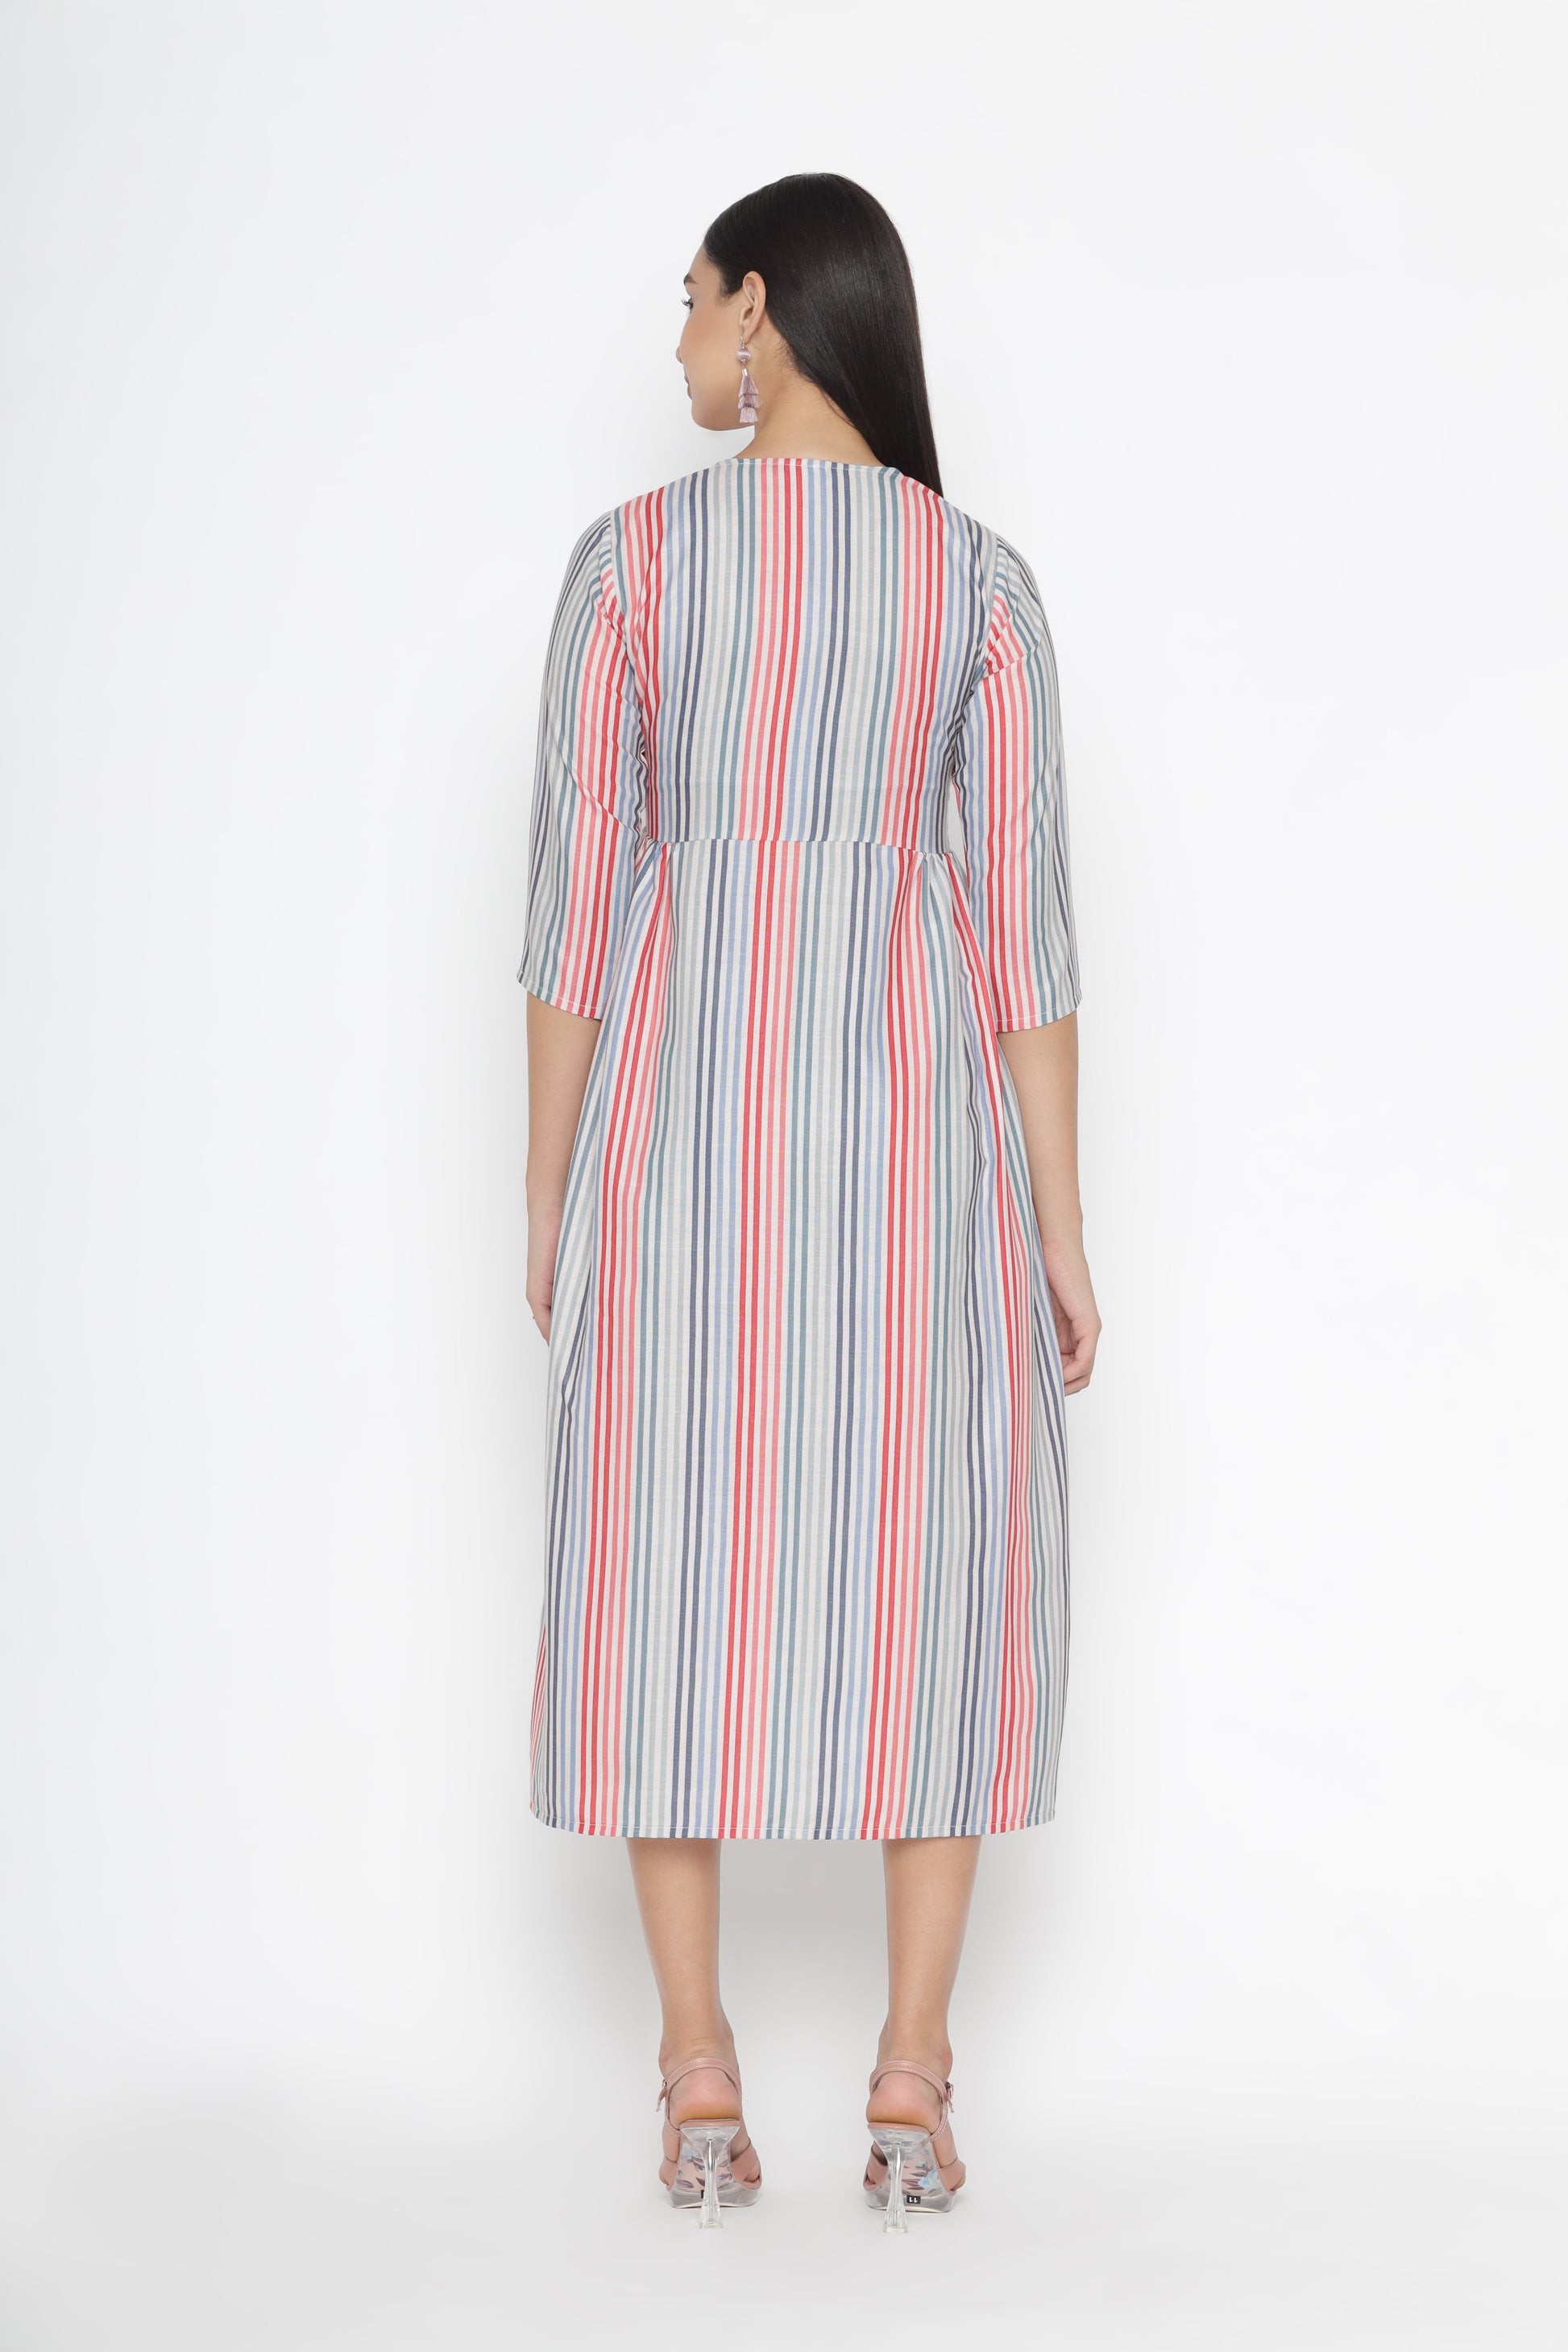 Women Blue Printed Striped A-Line Midi Dress  From Octics At Rs 1399 | OCTICS